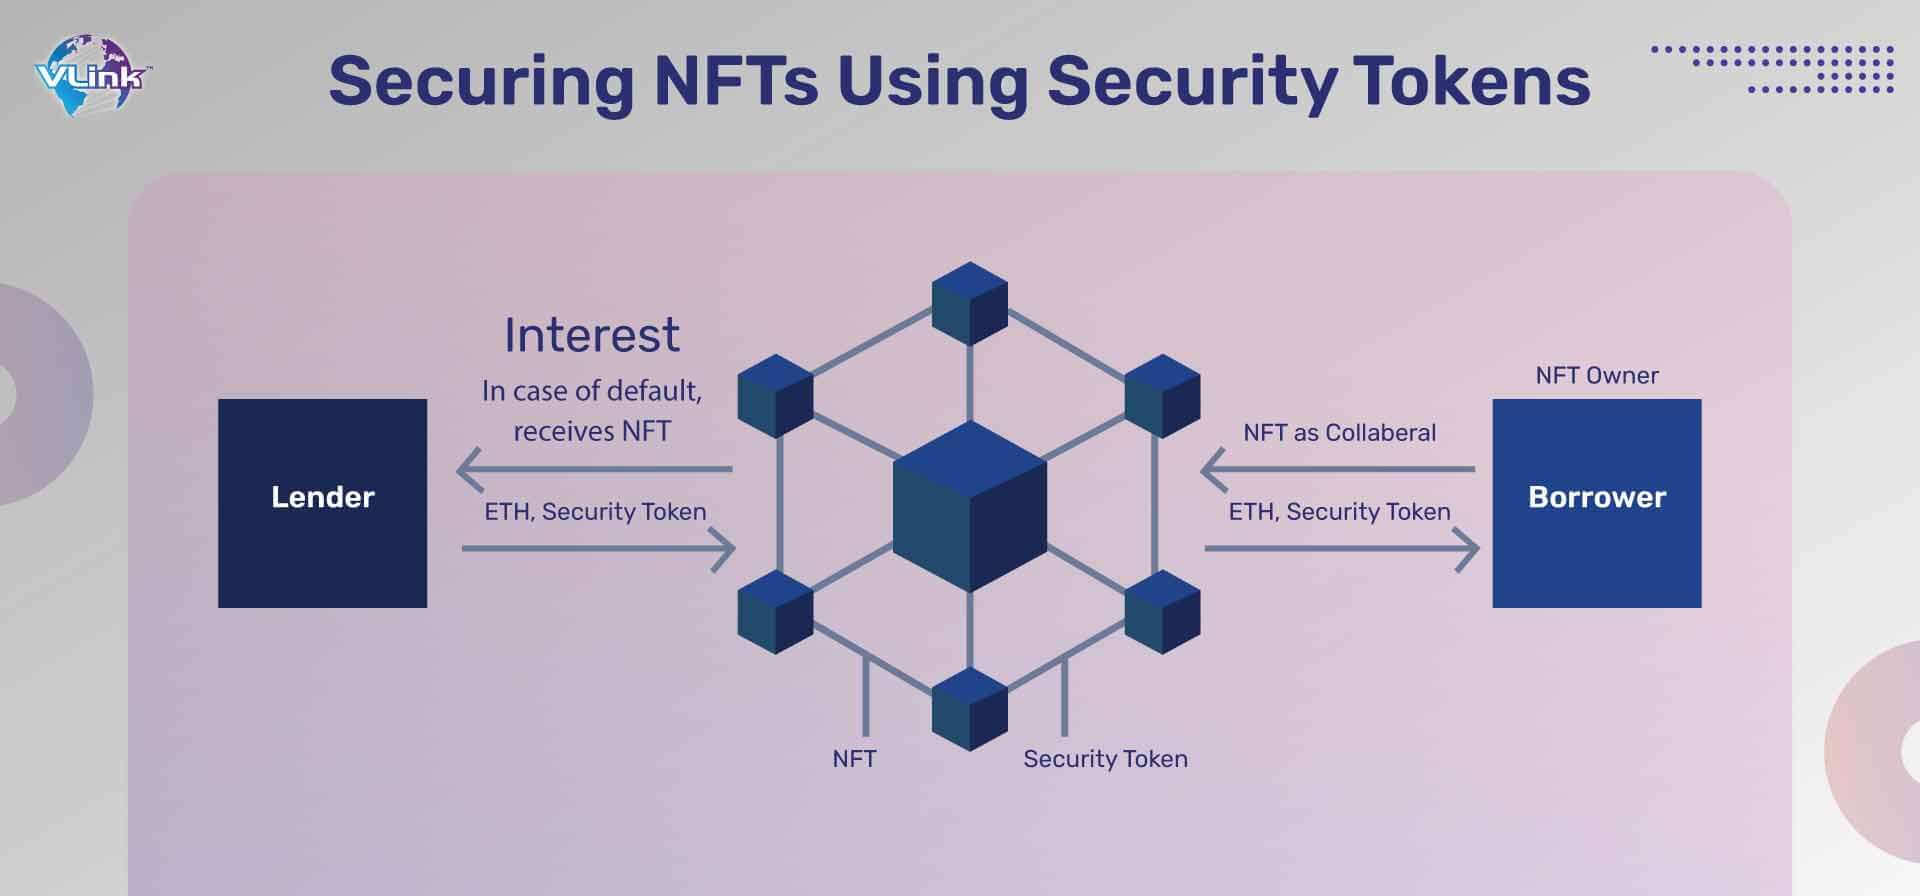 Securing NFTs Using Security Tokens